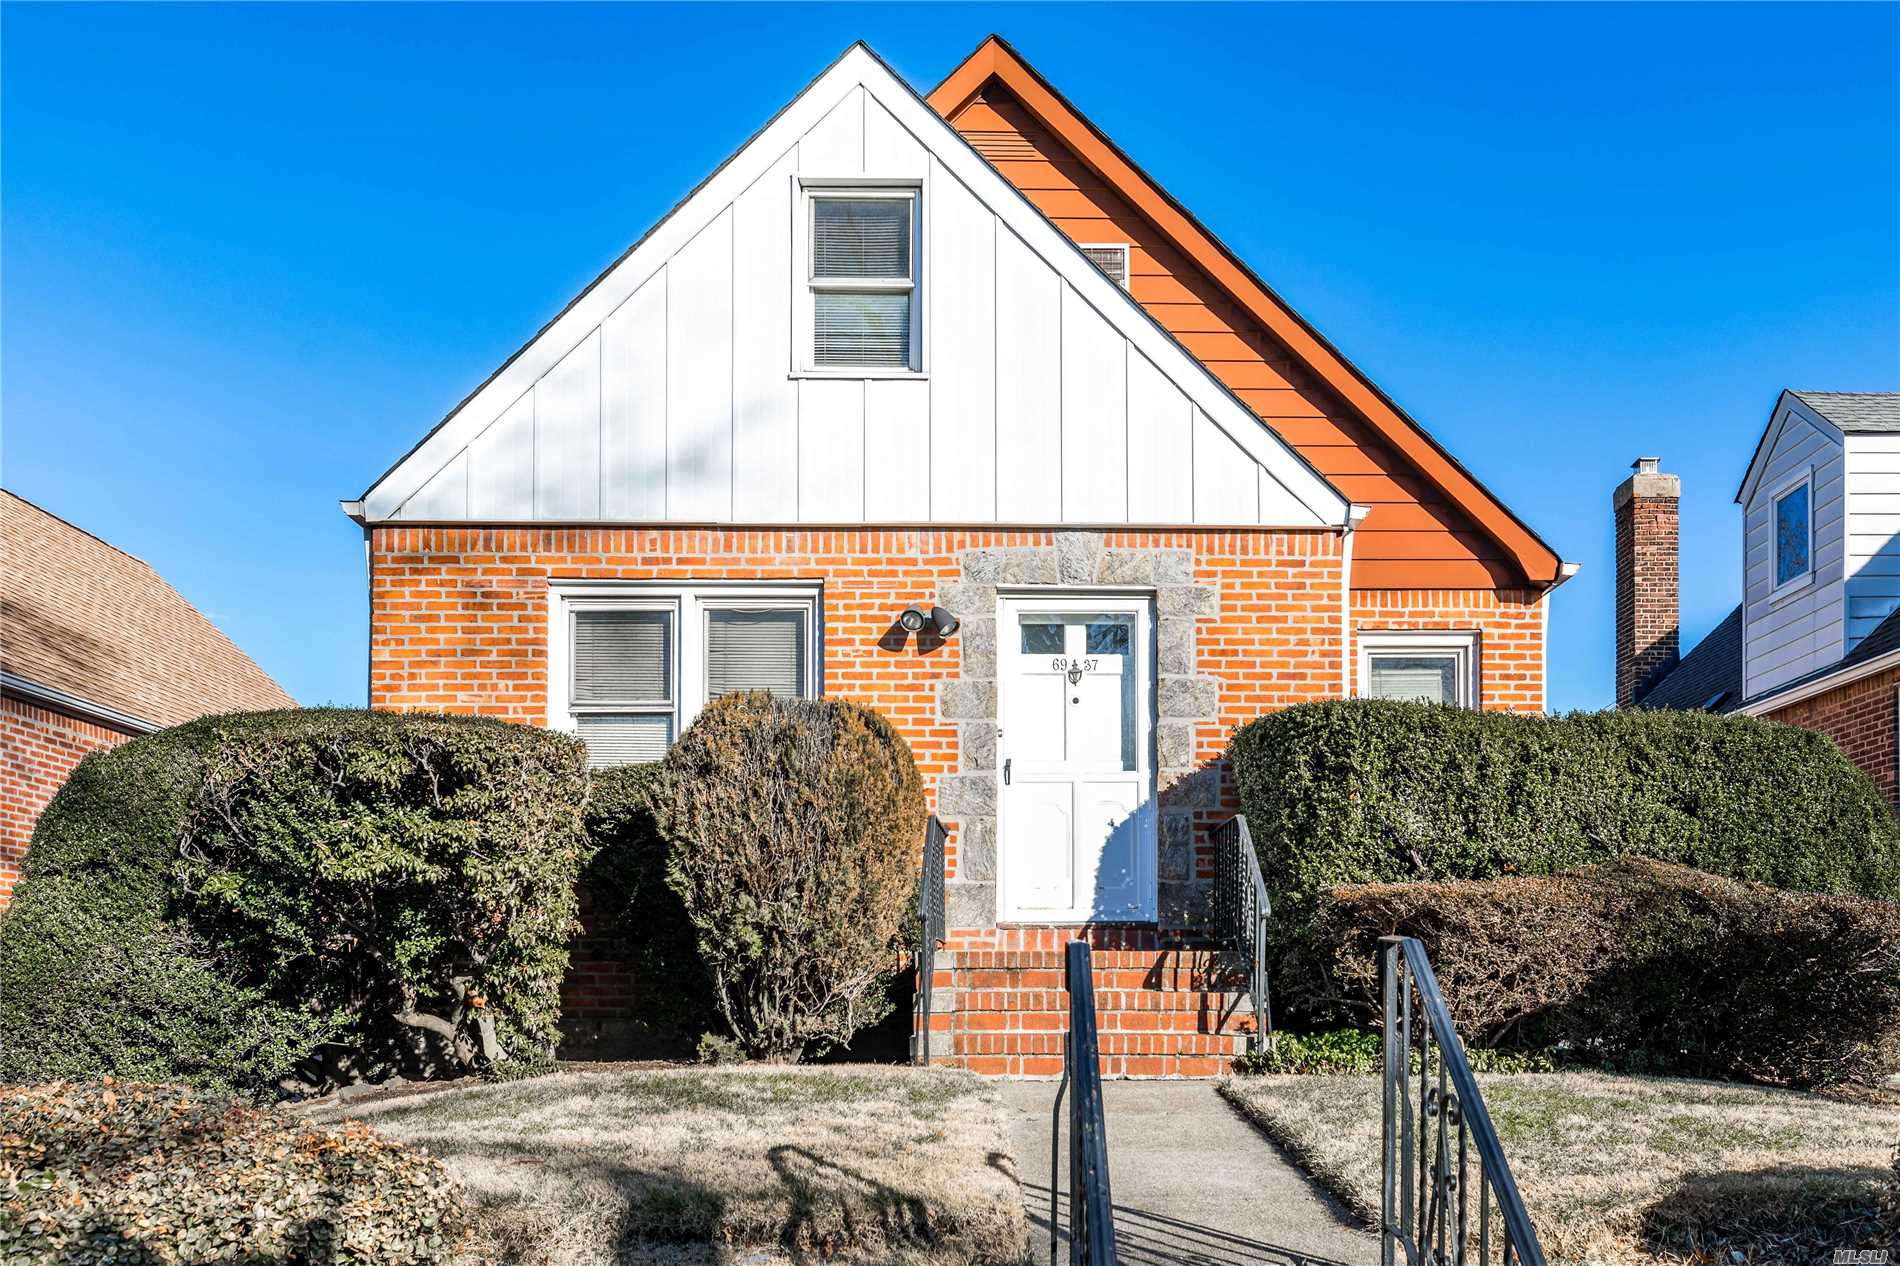 Don&rsquo;t Miss This Spacious 4Br Cape Cod For Sale In Fresh Meadows Featuring Dinette Eik, Hardwood Floors, Detached Garage And Beautifully Maintained Private Back Yard!